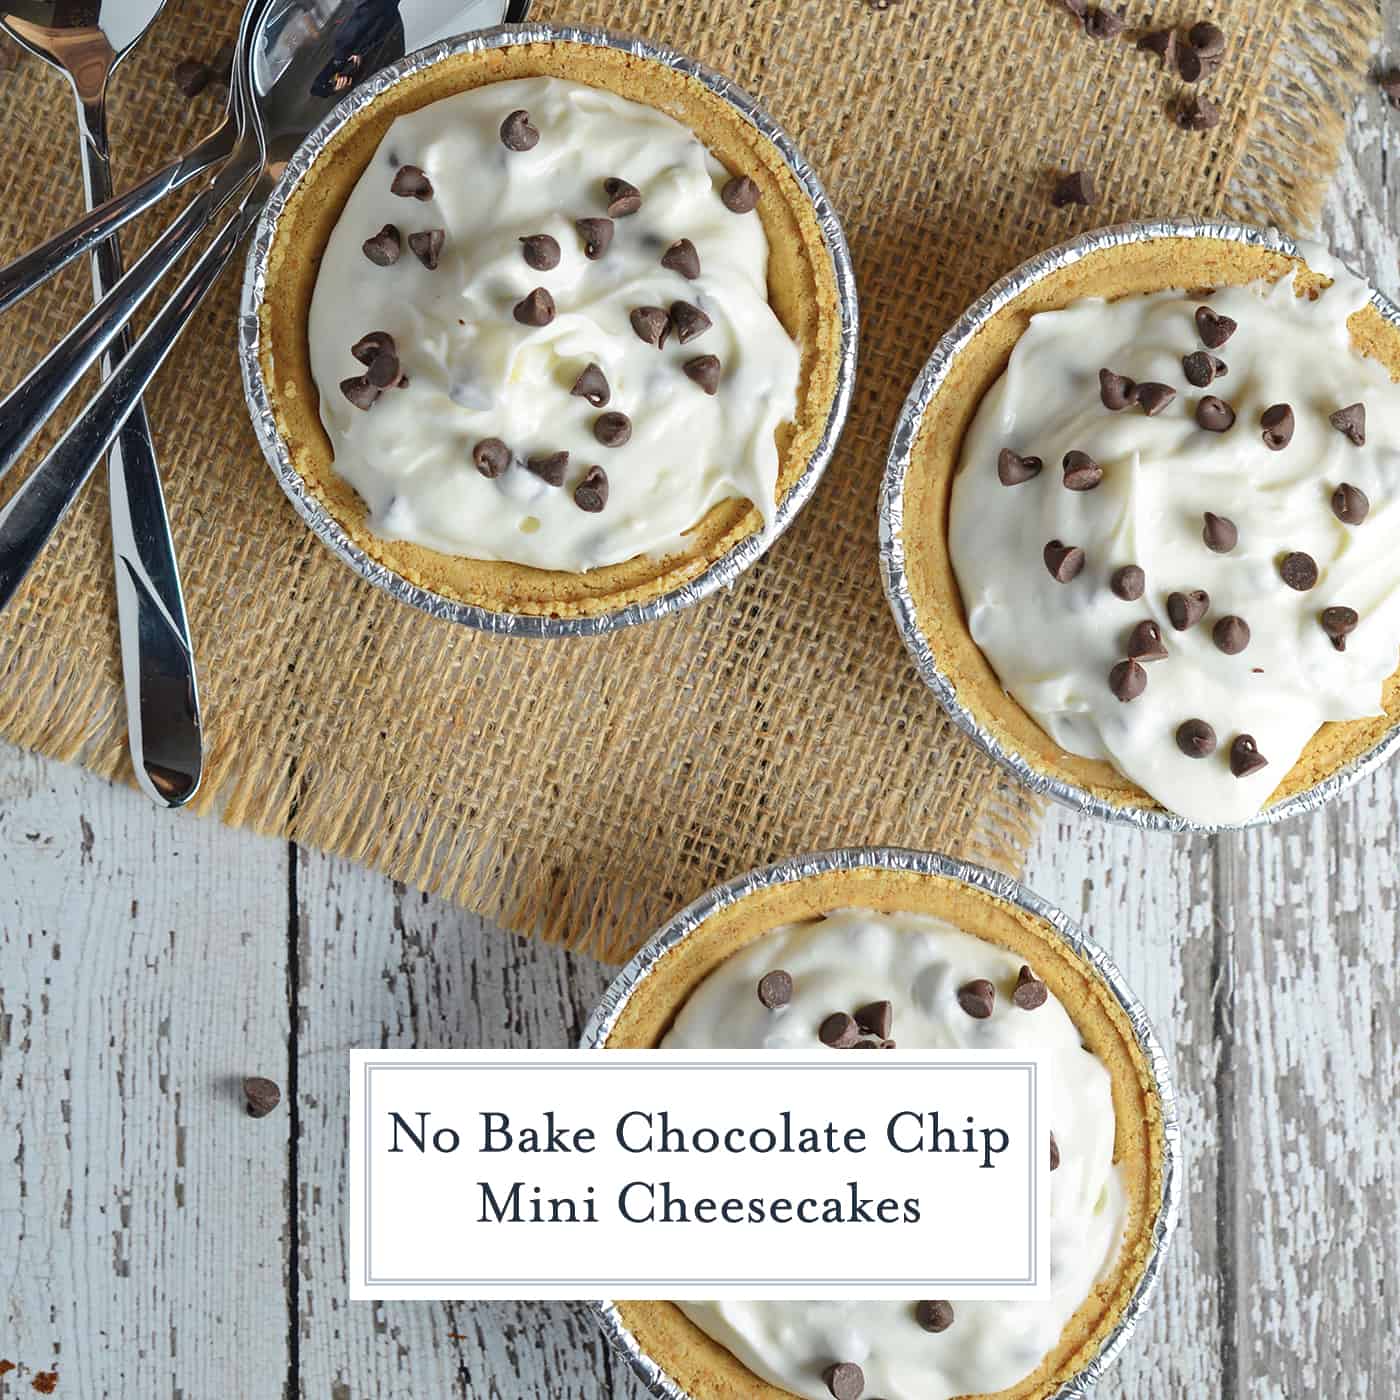 No Bake Chocolate Chip Mini Cheesecakes Recipe is an easy summer time no bake cheesecake recipe. Only takes 10 minutes to make and everyone will enjoy them! #minicheesecakerecipe #nobakecheesecakerecipe #chocolatechipcheesecake www.savoryexperiments.com